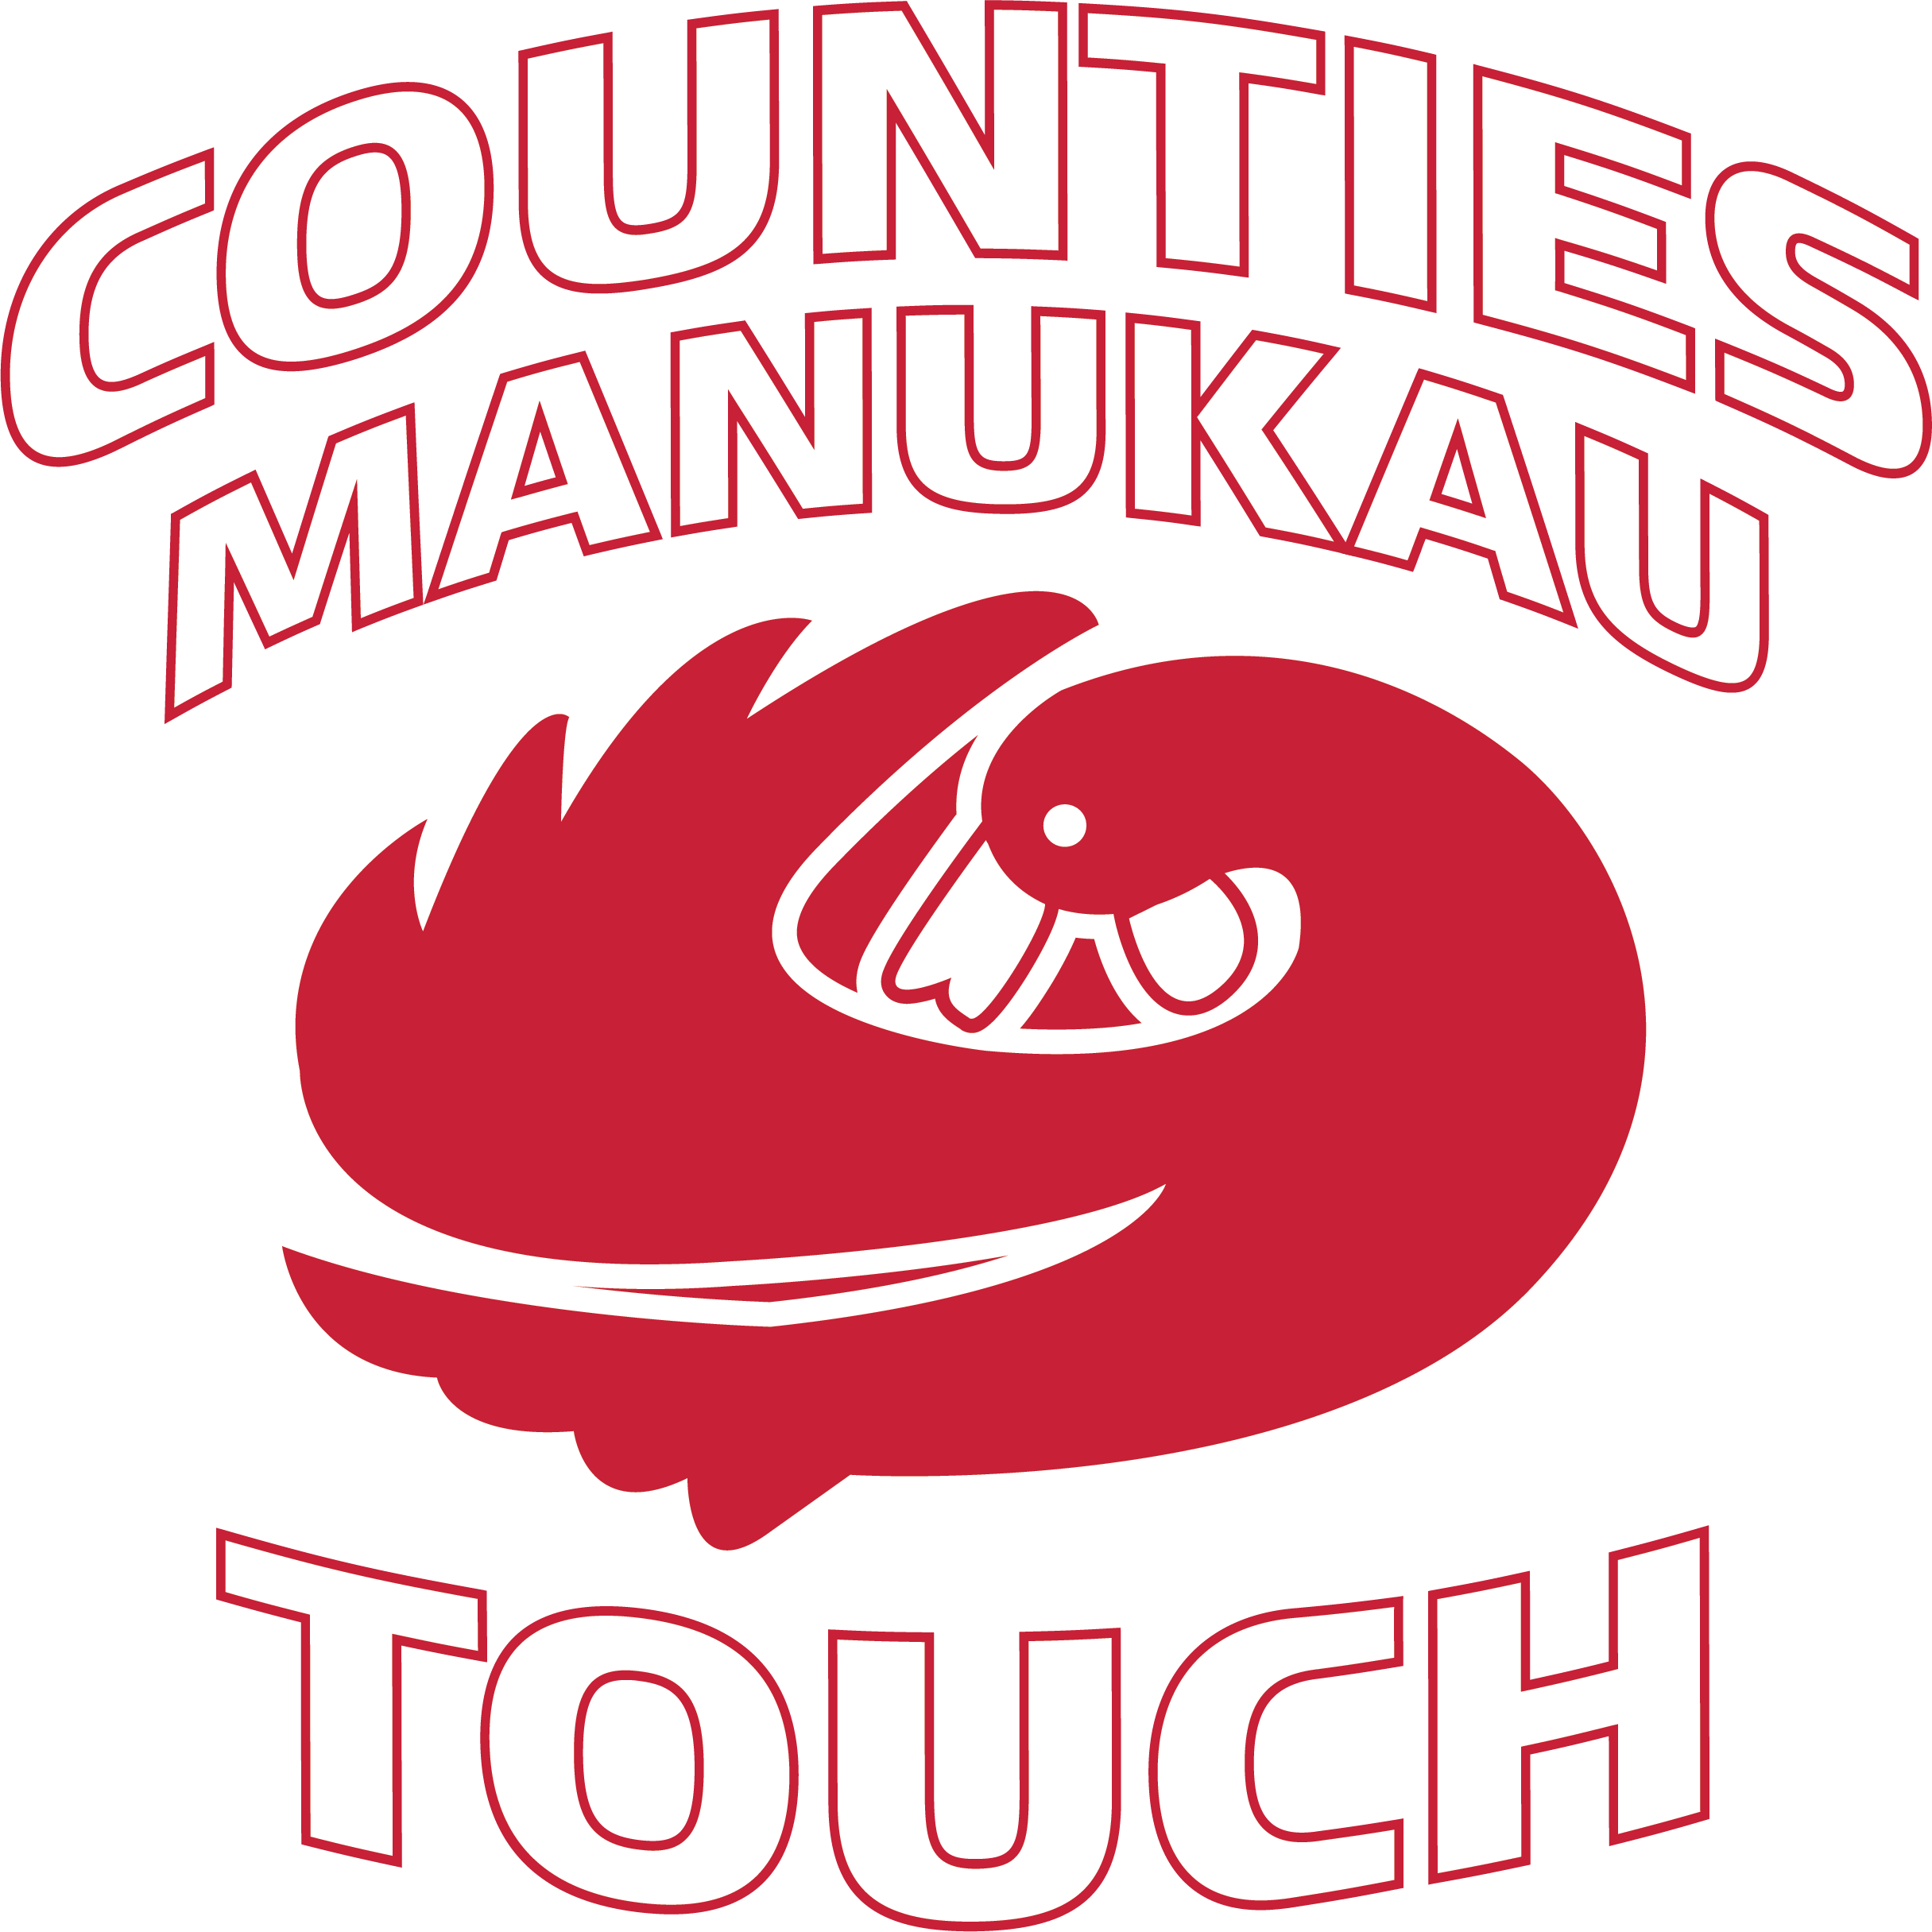 counties-manukau-touch-association-counties-manukau-touch-association